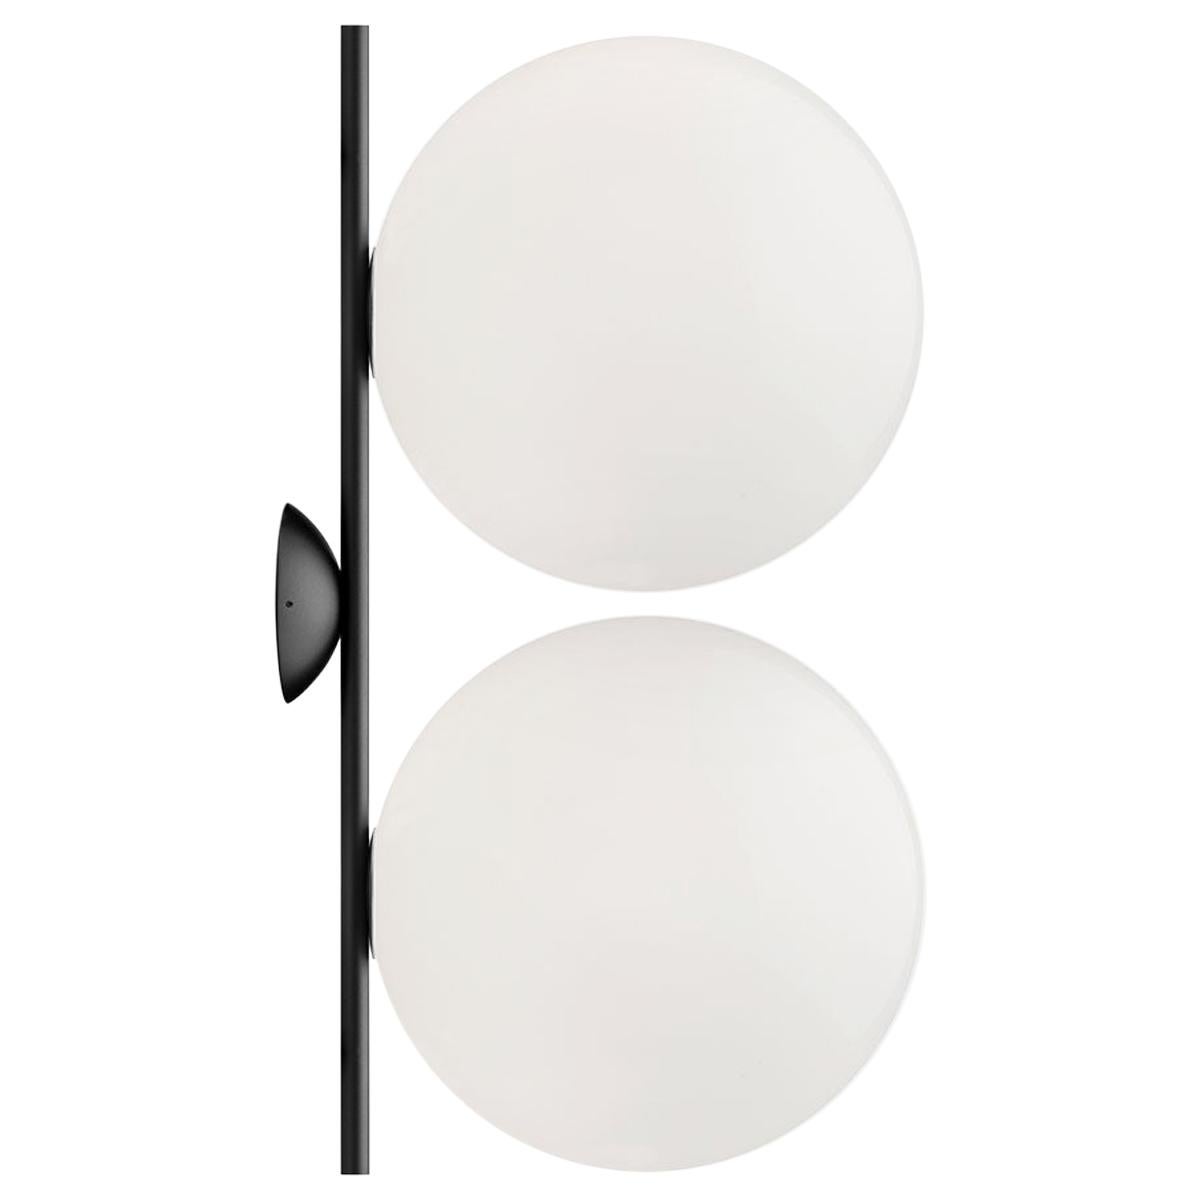 Flos IC Lights C/W2 Double Ceiling/Wall Sconce in Black by Michael Anastassiades